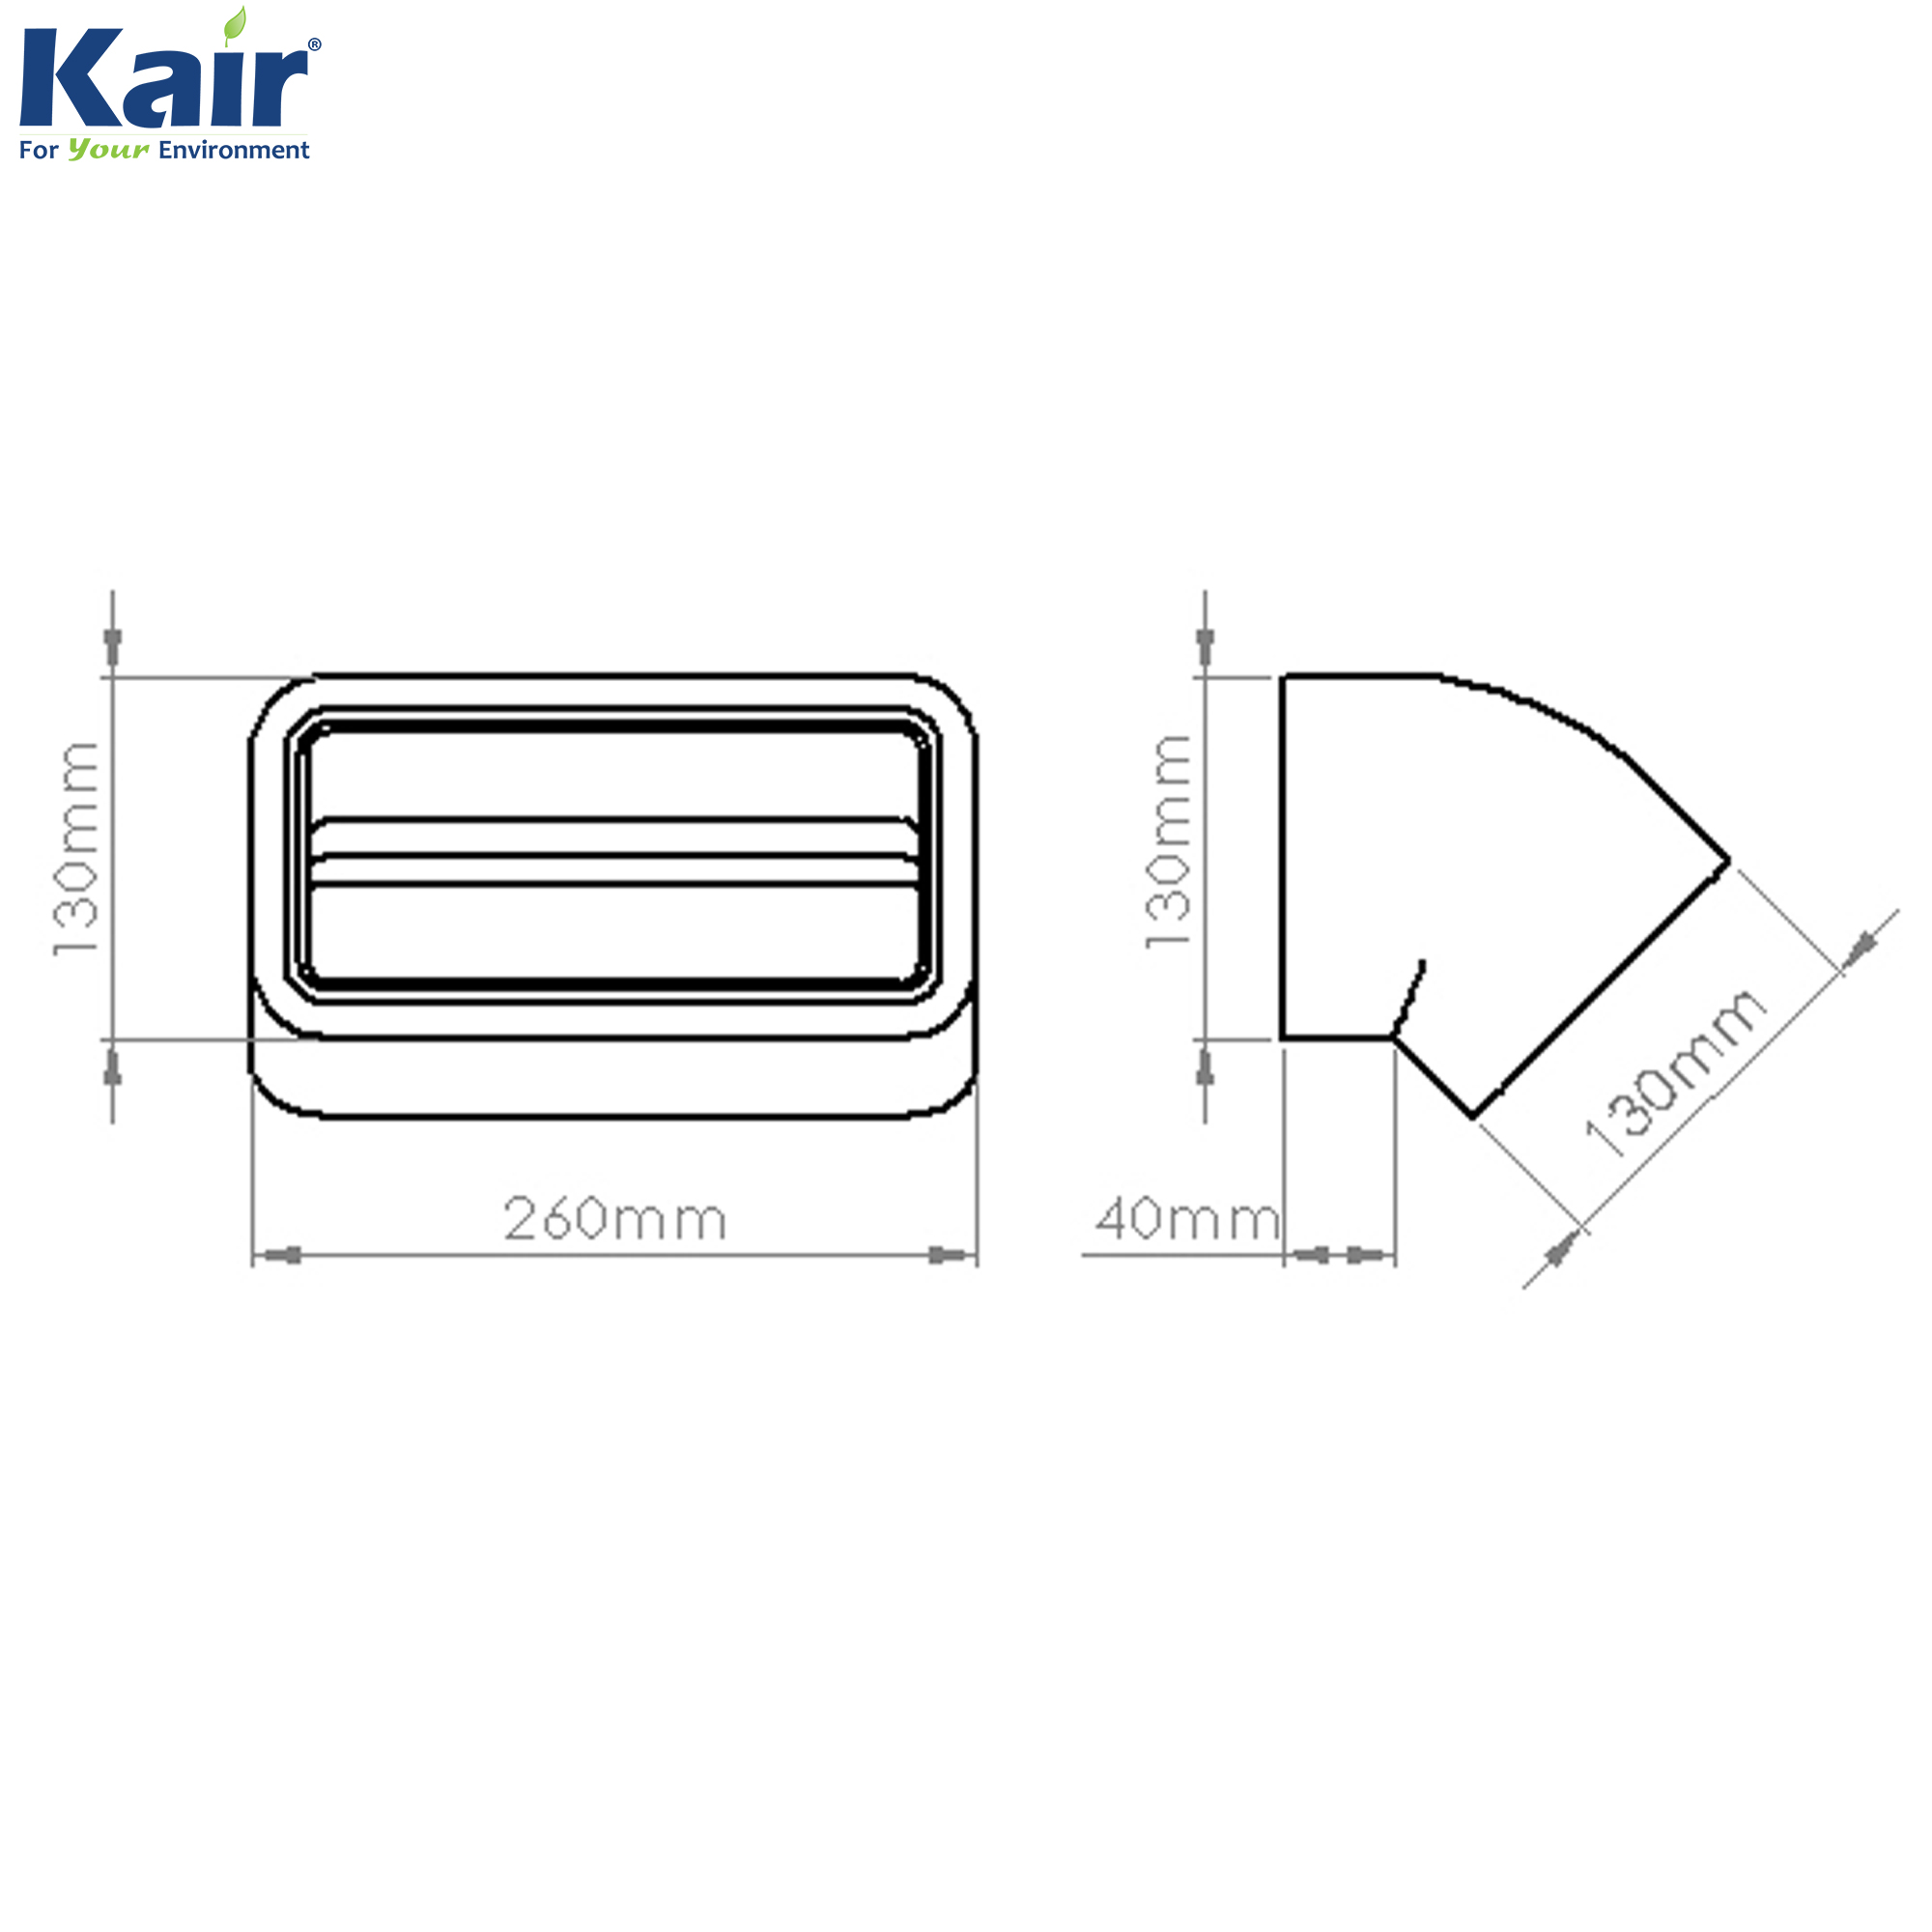 Box of 6 x Kair Self-Seal Thermal Ducting 220X90mm Vertical 45 Degree Bends With Female Click & Lock Fittings